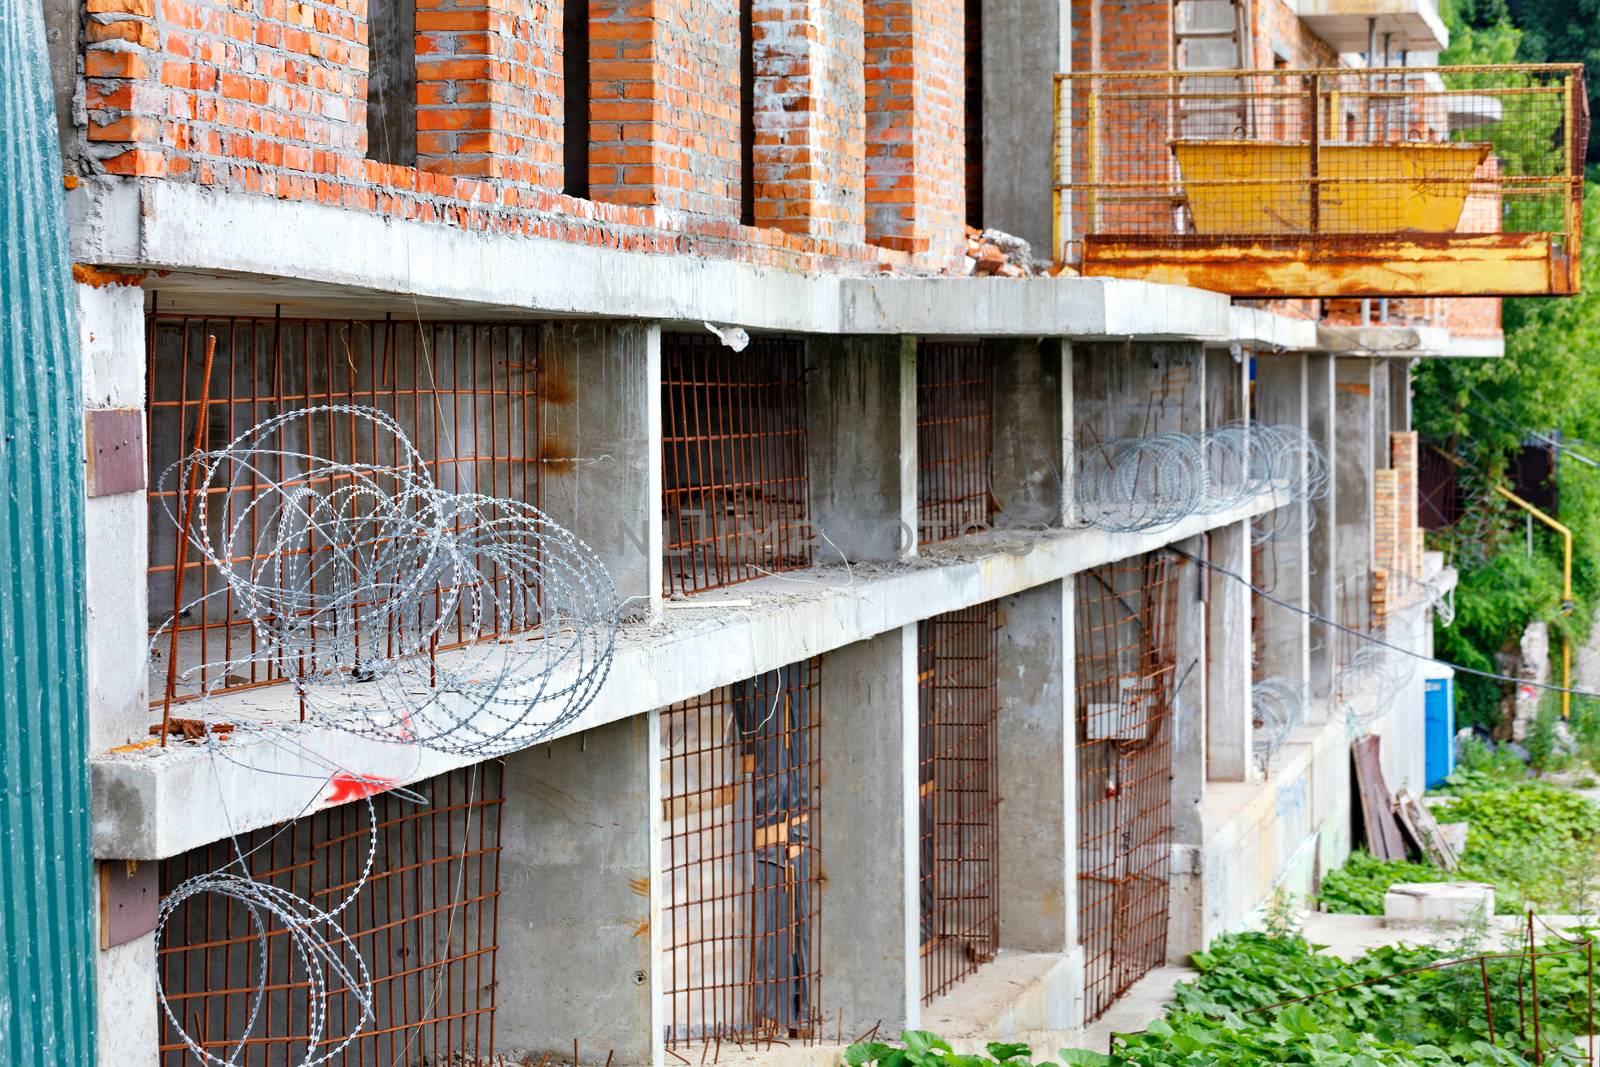 Barbed wire and rusty iron rods prevent entry into an abandoned construction site in the industrial zone.